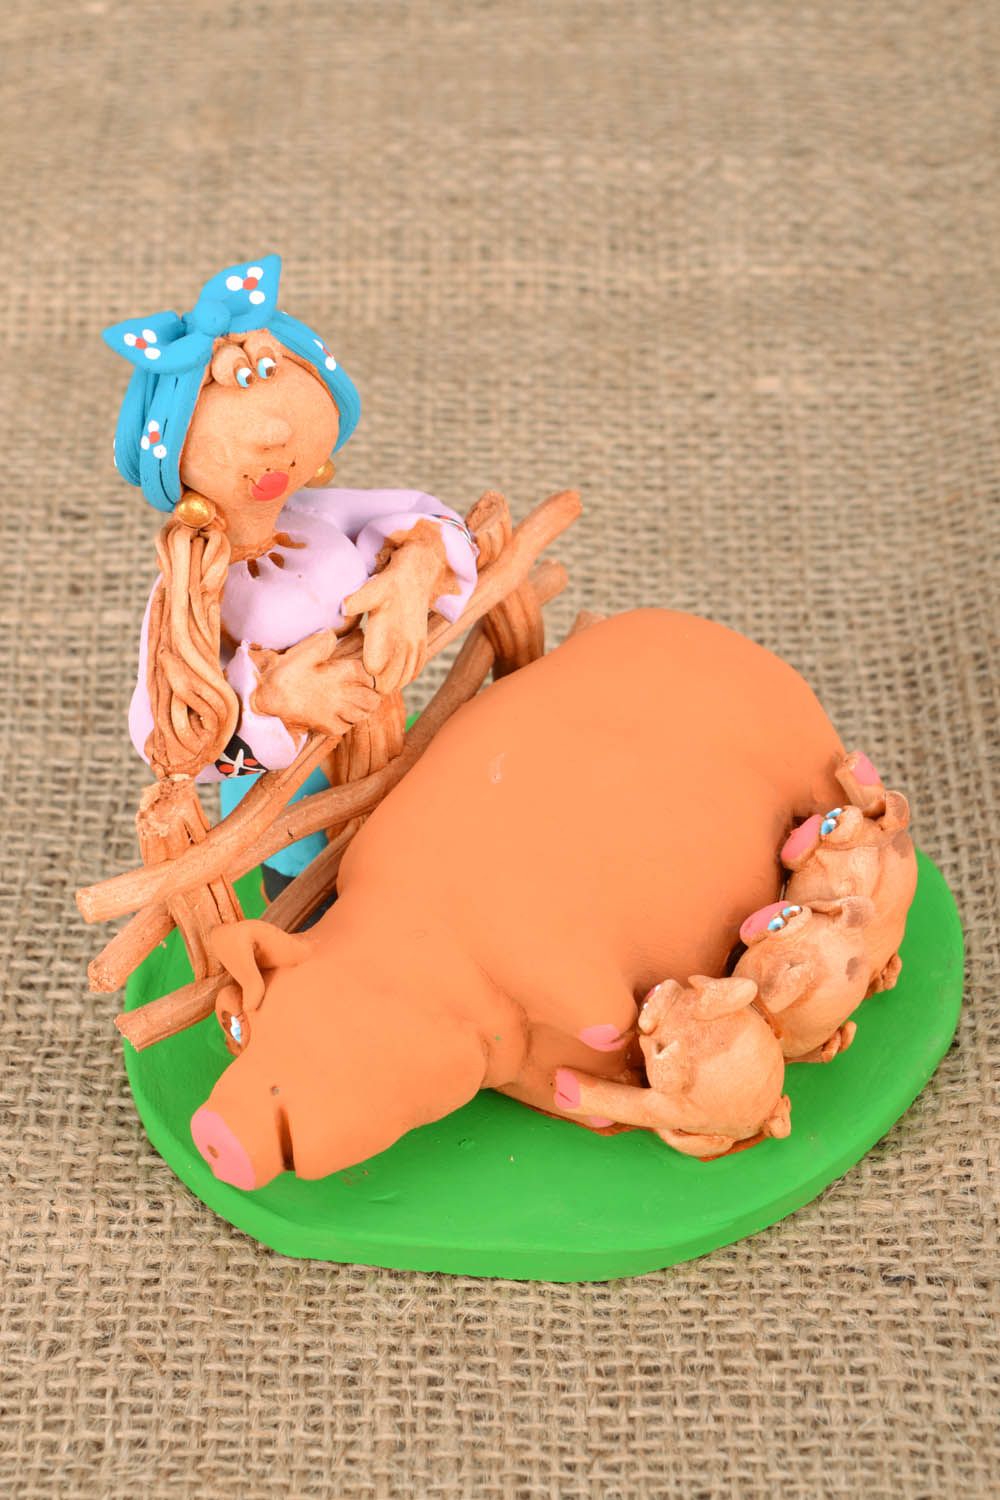 Homemade statuette The Cossack Woman and a Pig with Piglets photo 1